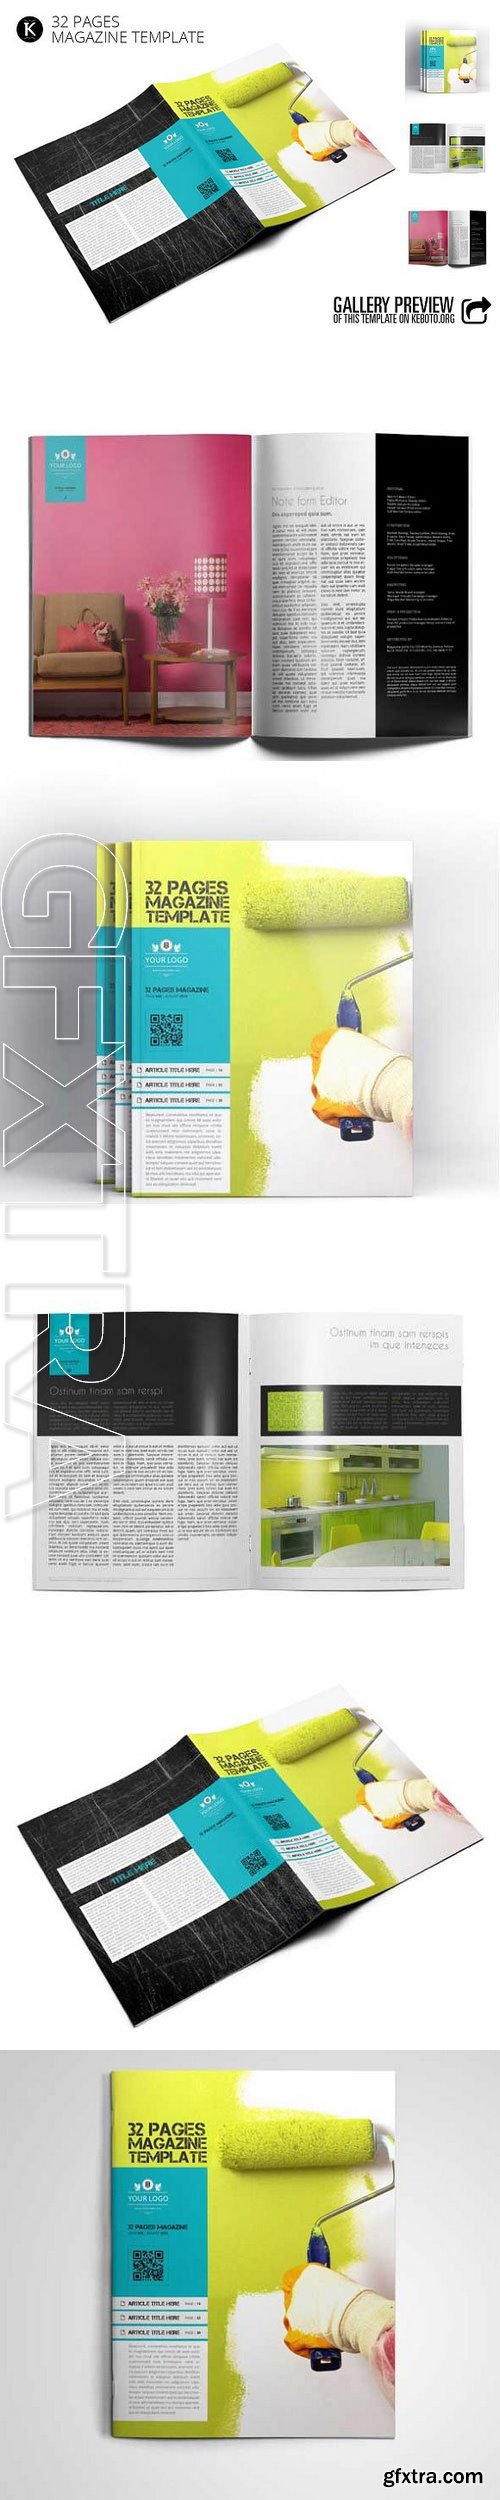 CM - 32 Pages Magazine Template 1039172